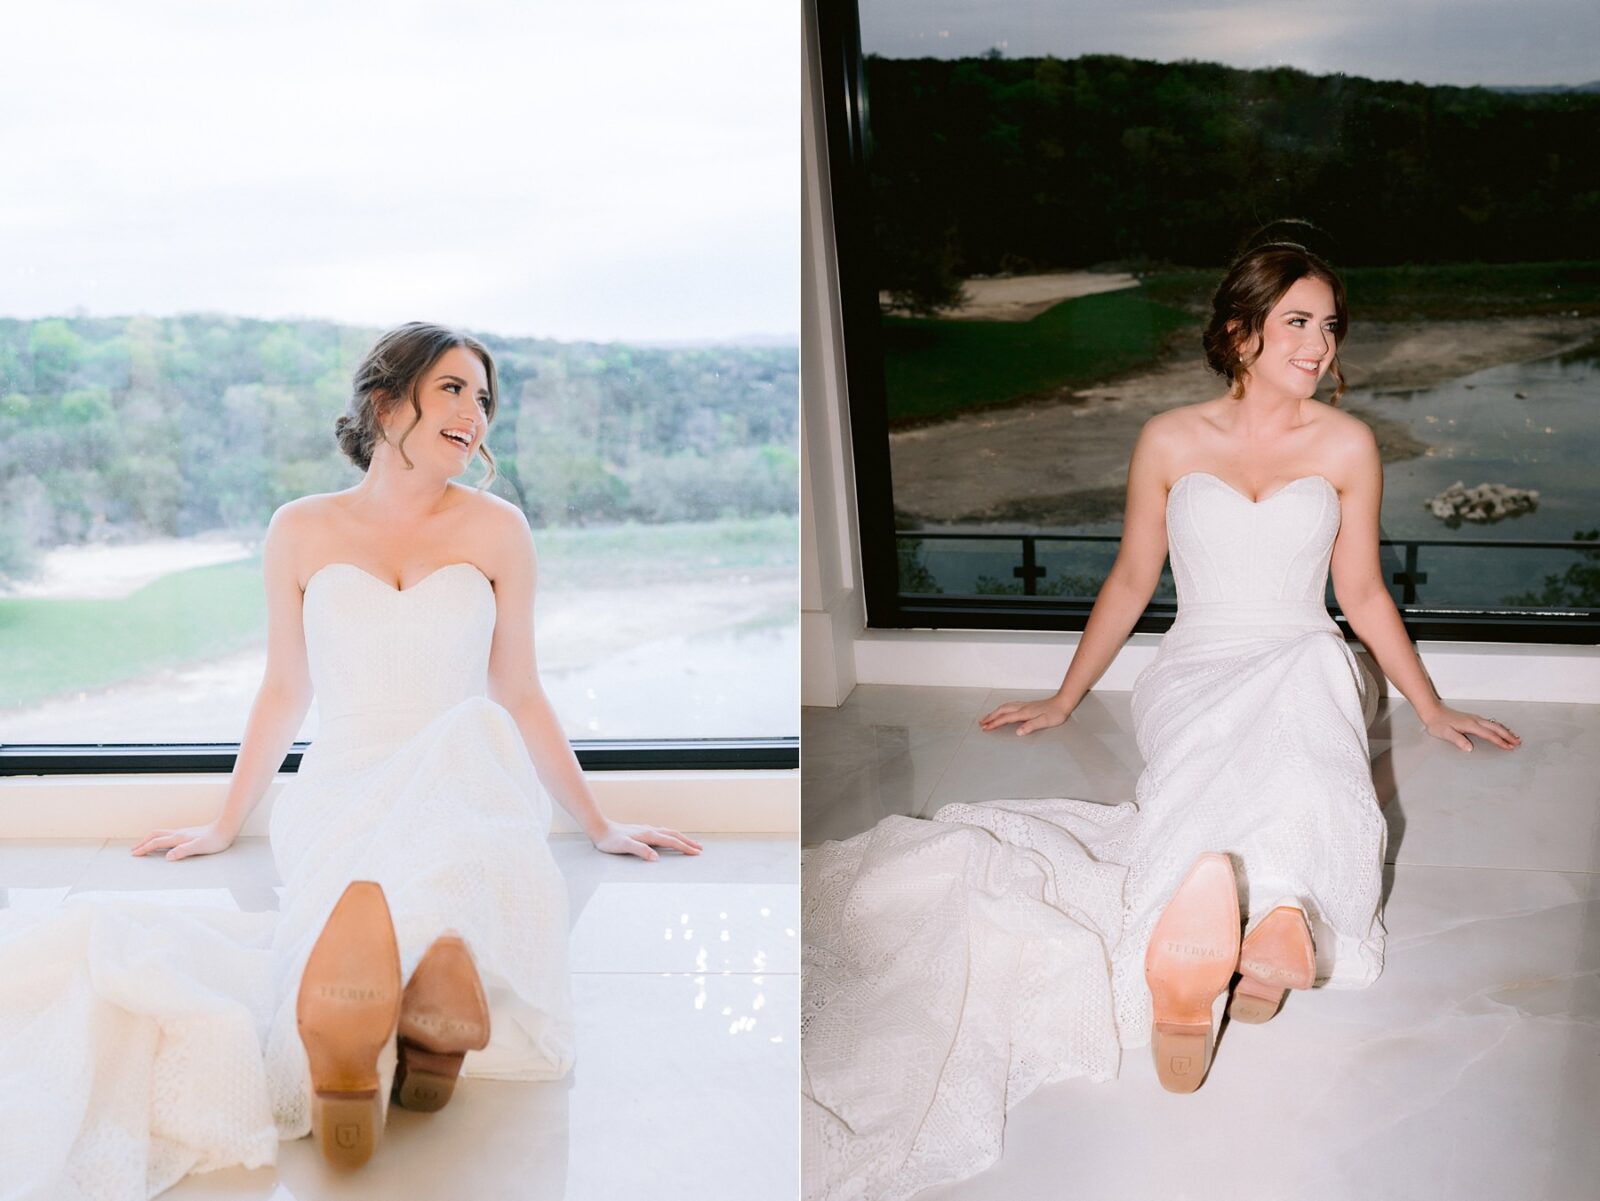 natural light versus flash, bounced flash vs direct flash, different flash photography techniques, modern bridal session, winter bridal session, bridal session, bride photography, the videre estate, hill country wedding venue, wimberley wedding venue, austin wedding photography, tara paige weddings, 